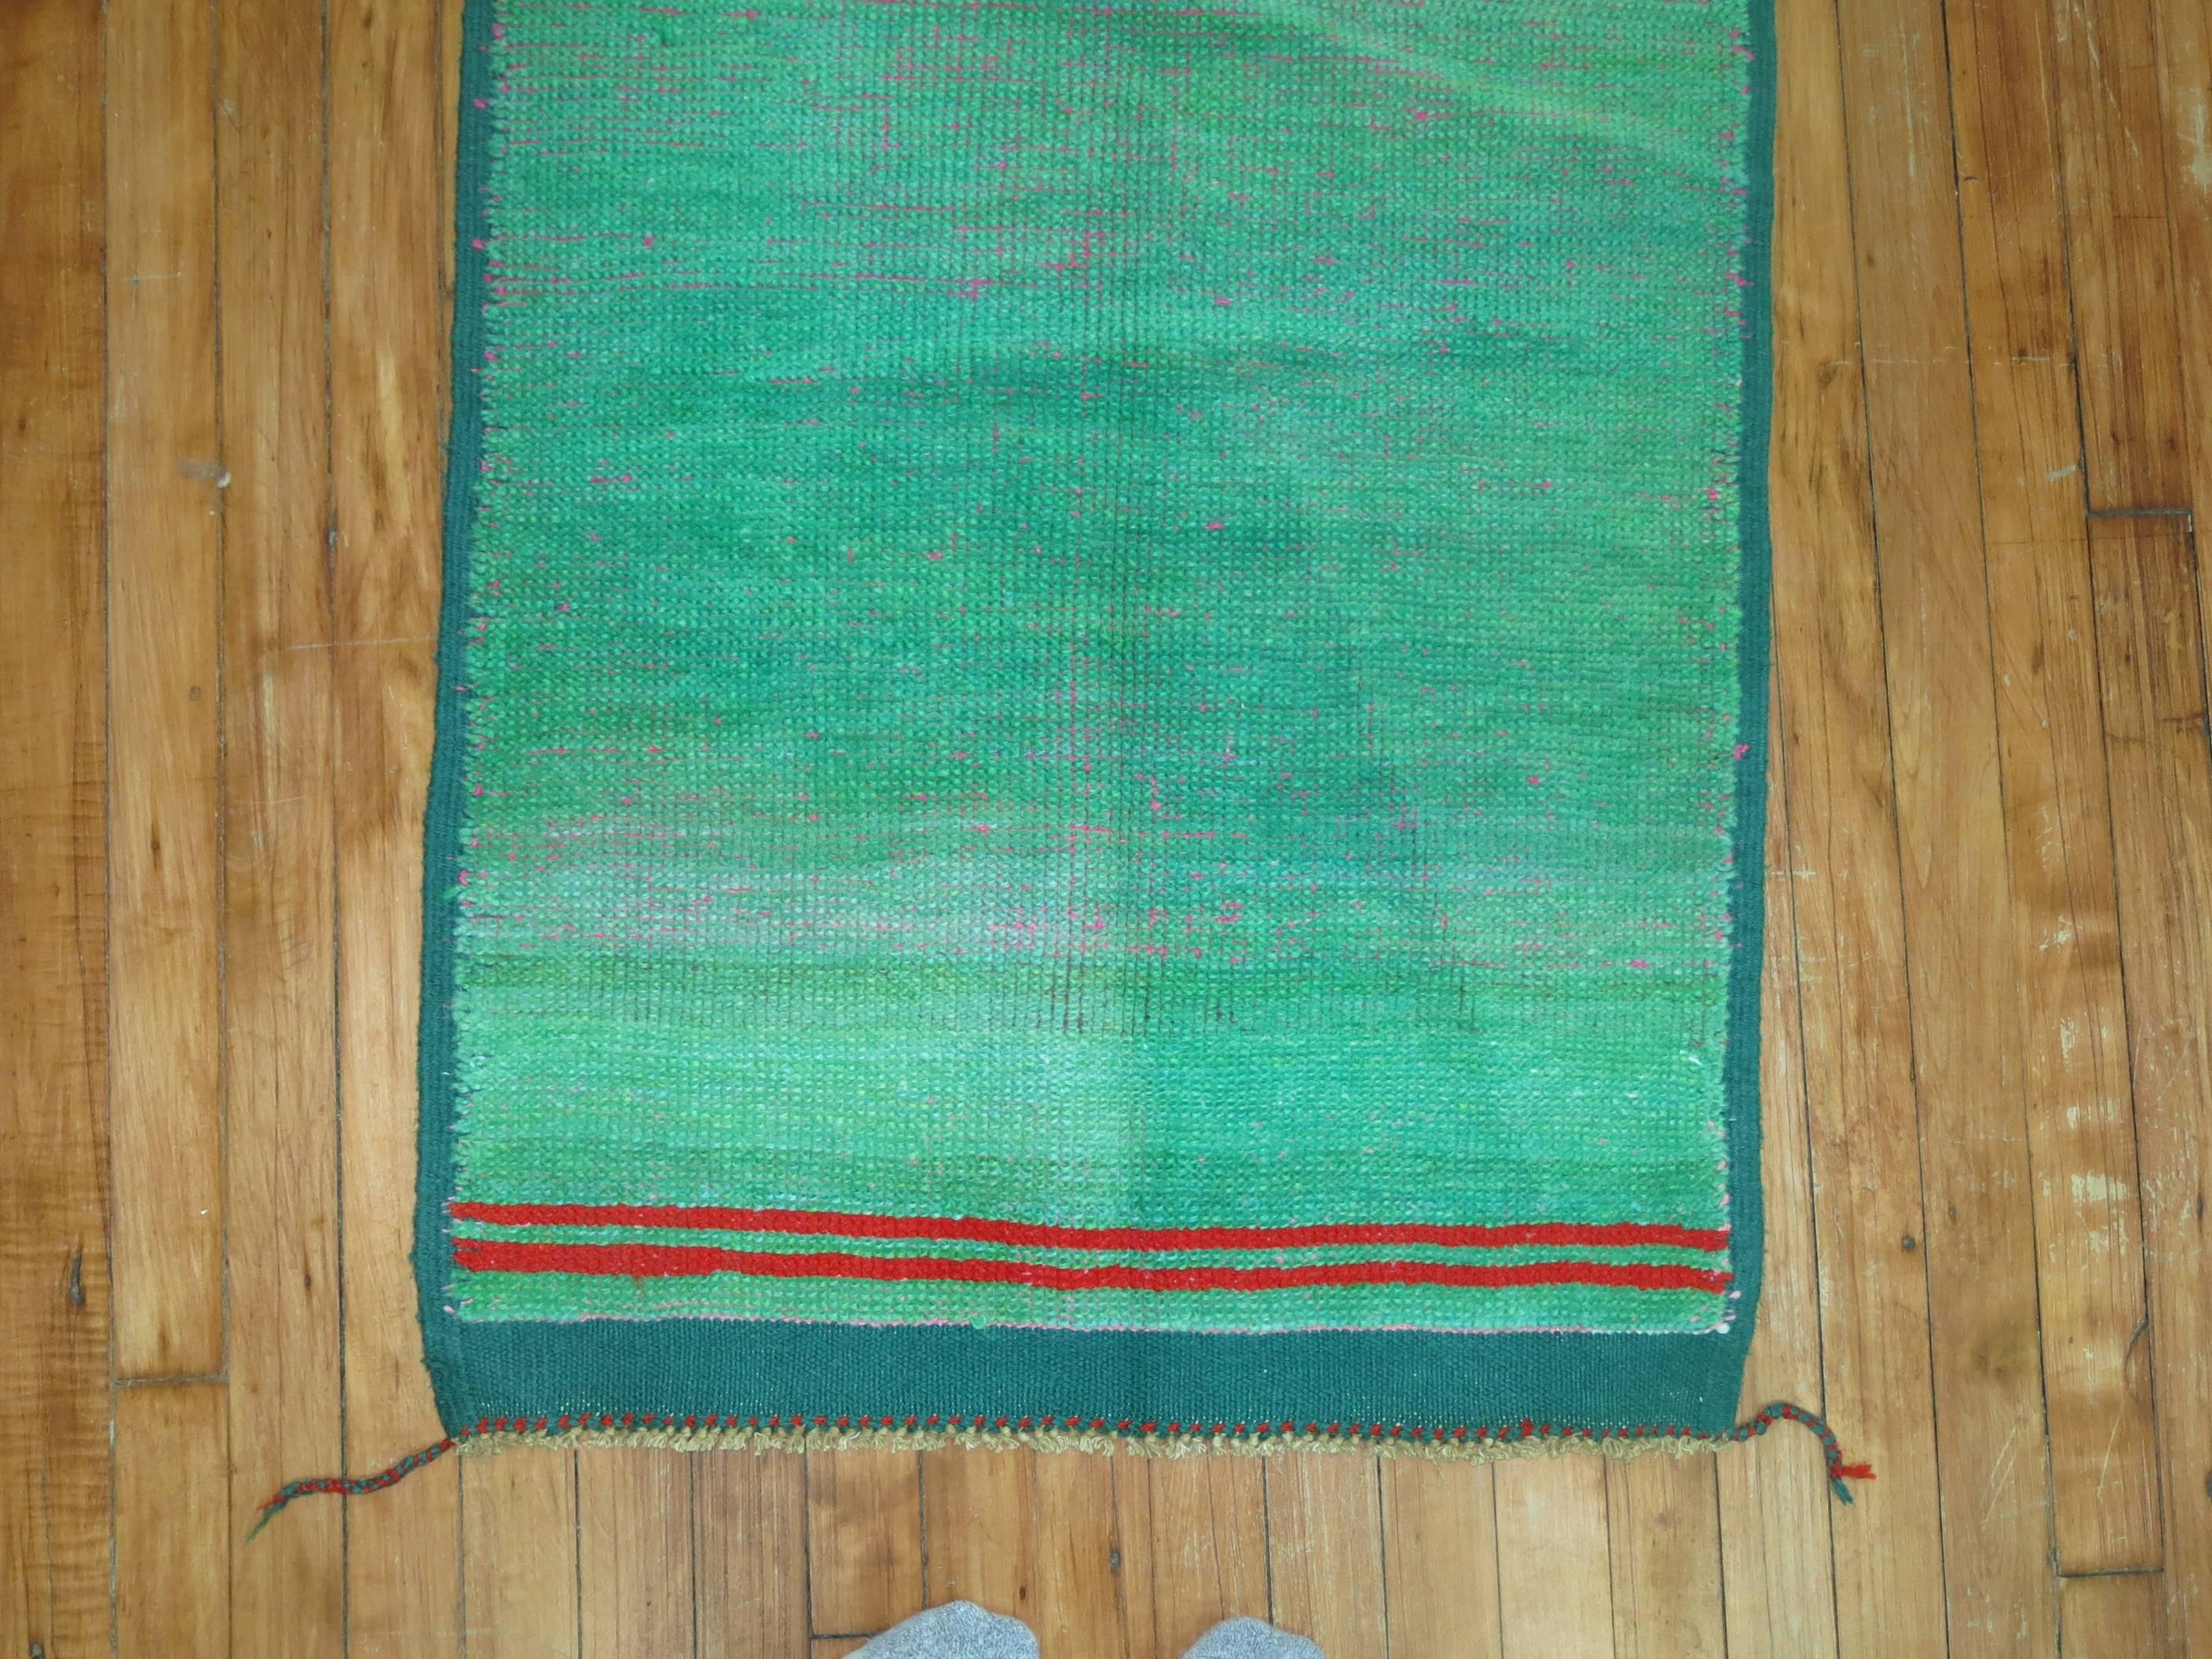 One of our most interesting finds recently this eclectic one of a kind vintage Anatolian with a plain solid green field with two red horizontal red stripes on one end. The texture and patina make this piece even more compelling too.

2'3'' x 4'10''